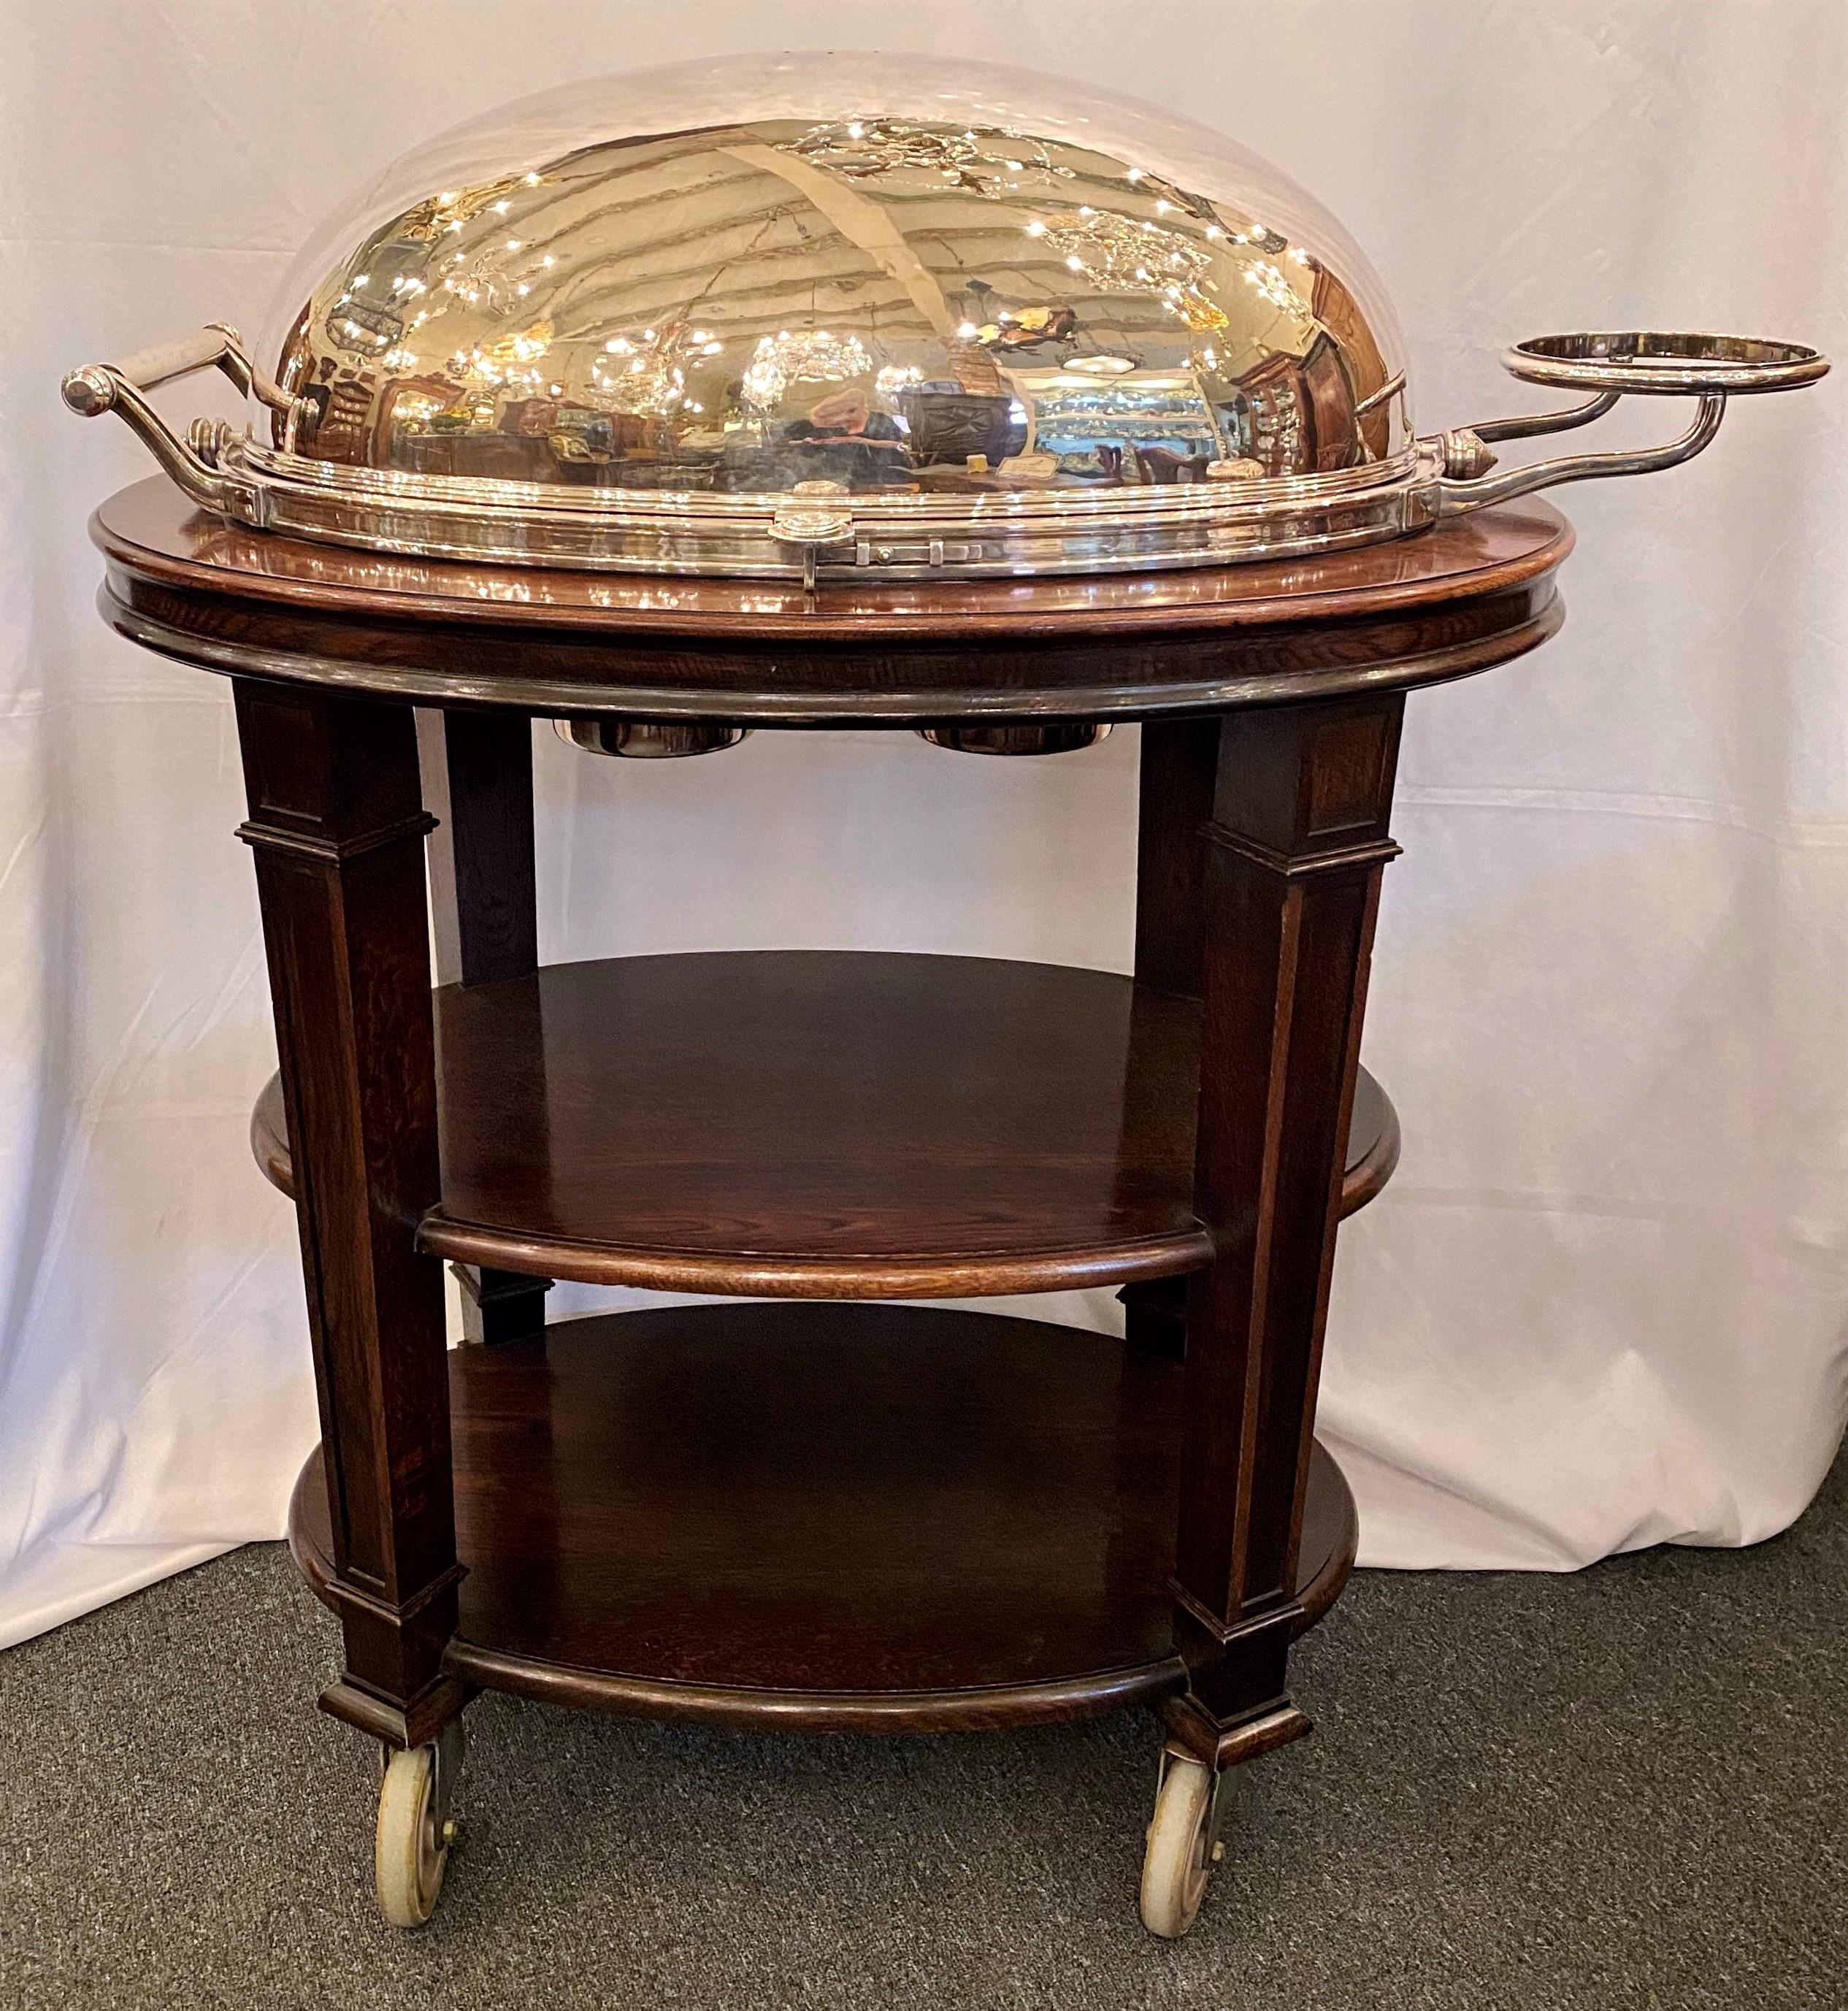 Estate English Sheffield silver plate and mahogany base carving trolley on casters, with warming burners and carving platter, circa 1950.
Measures: 48